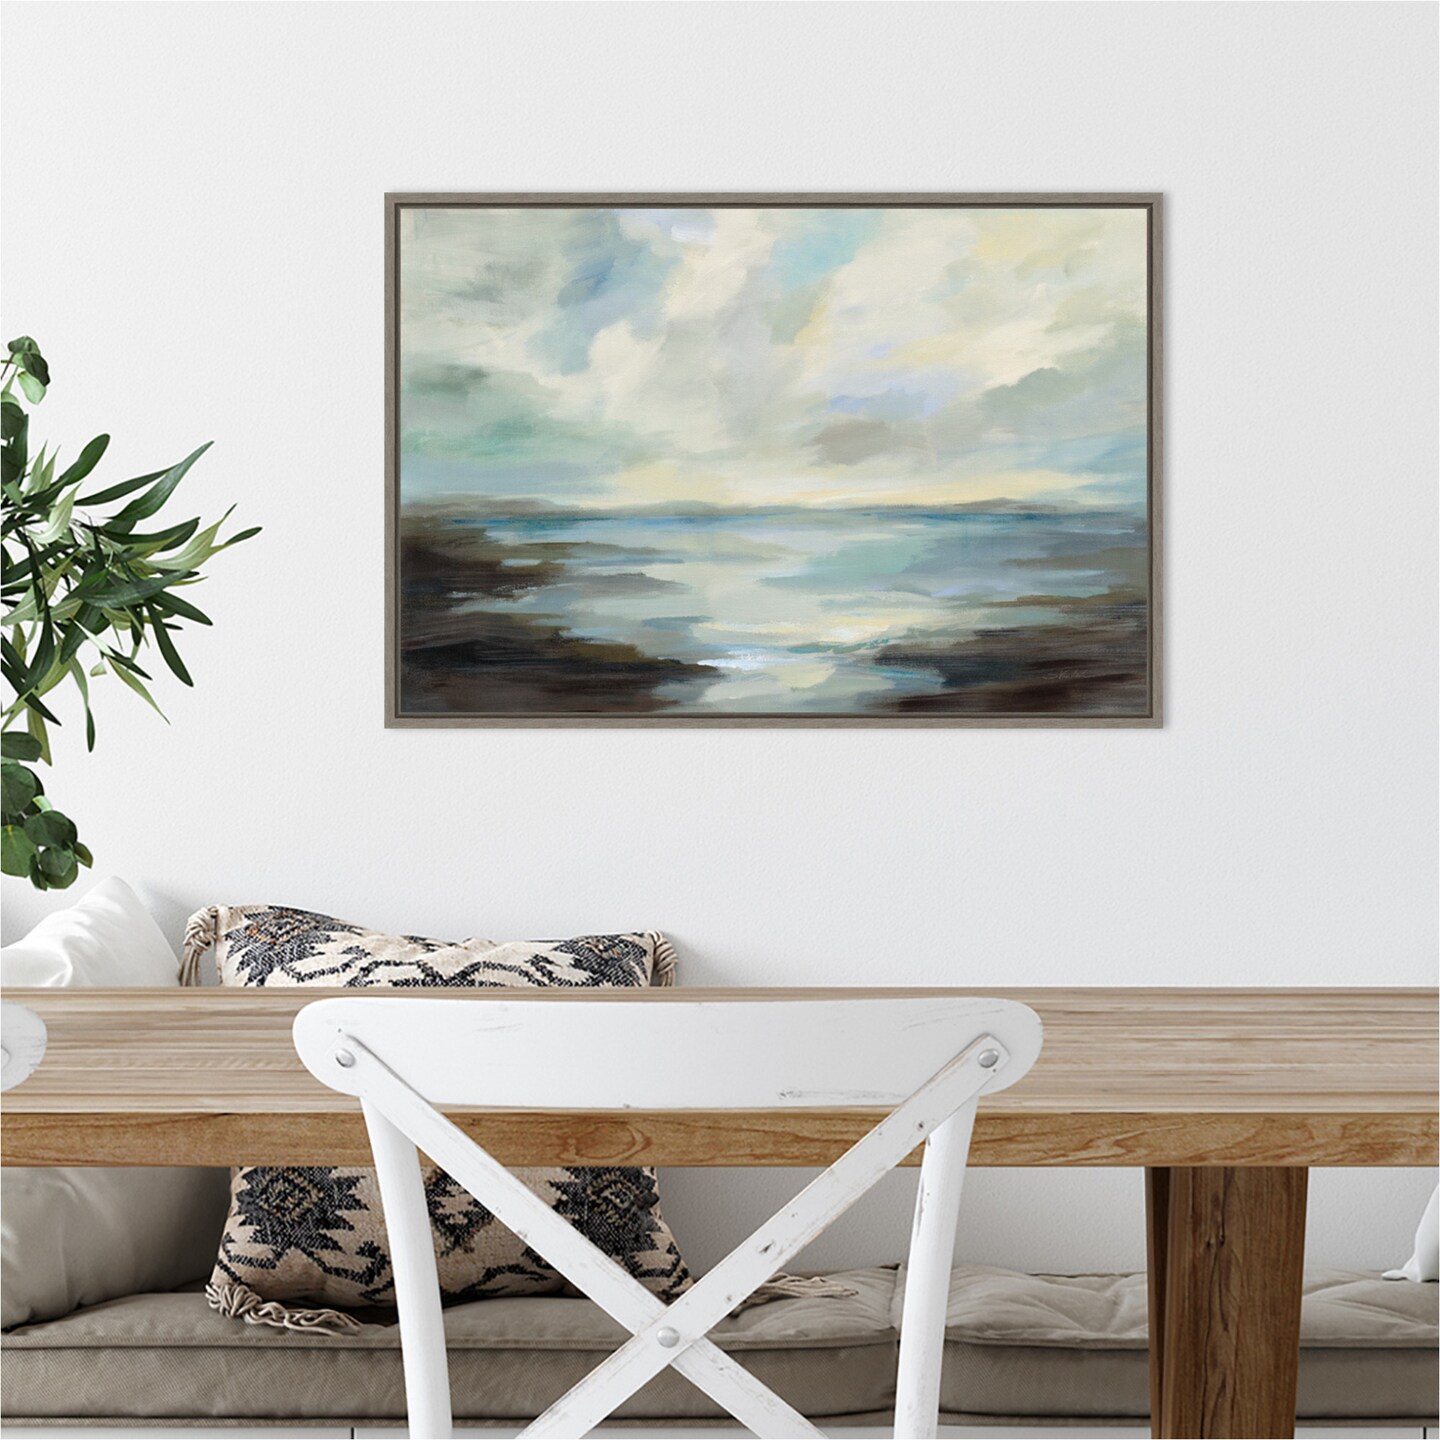 Northern Lagoon by Silvia Vassileva 23-in. W x 16-in. H. Canvas Wall Art Print Framed in Grey